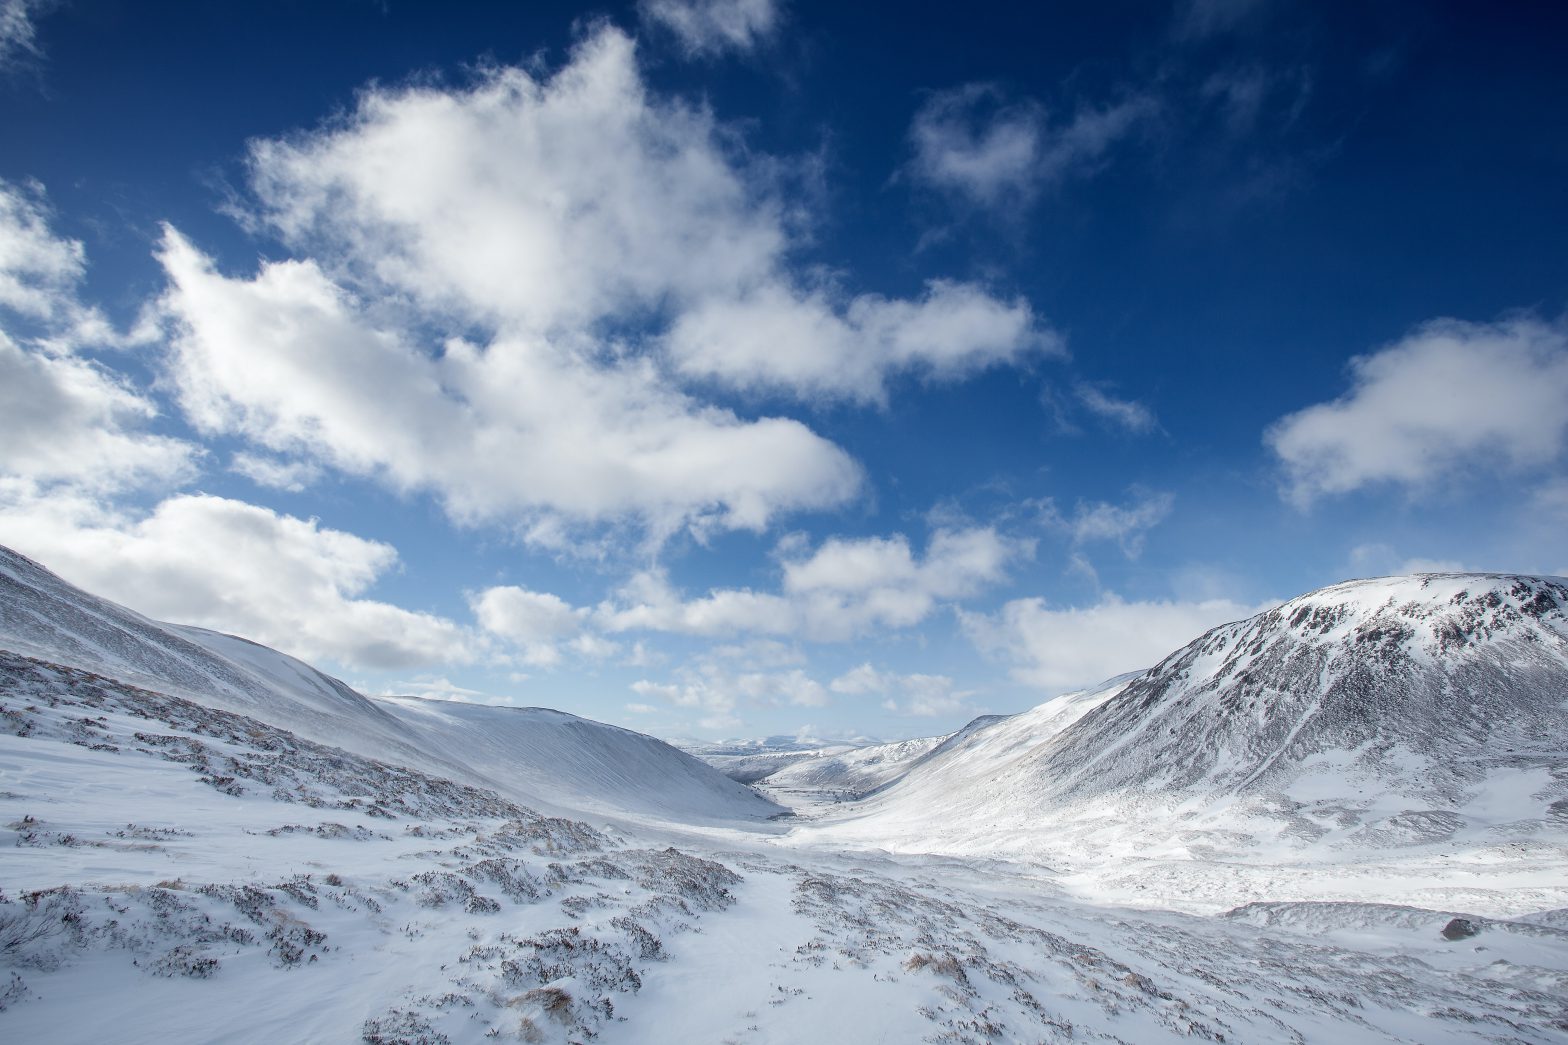 Snowy scenes at Cairngorms